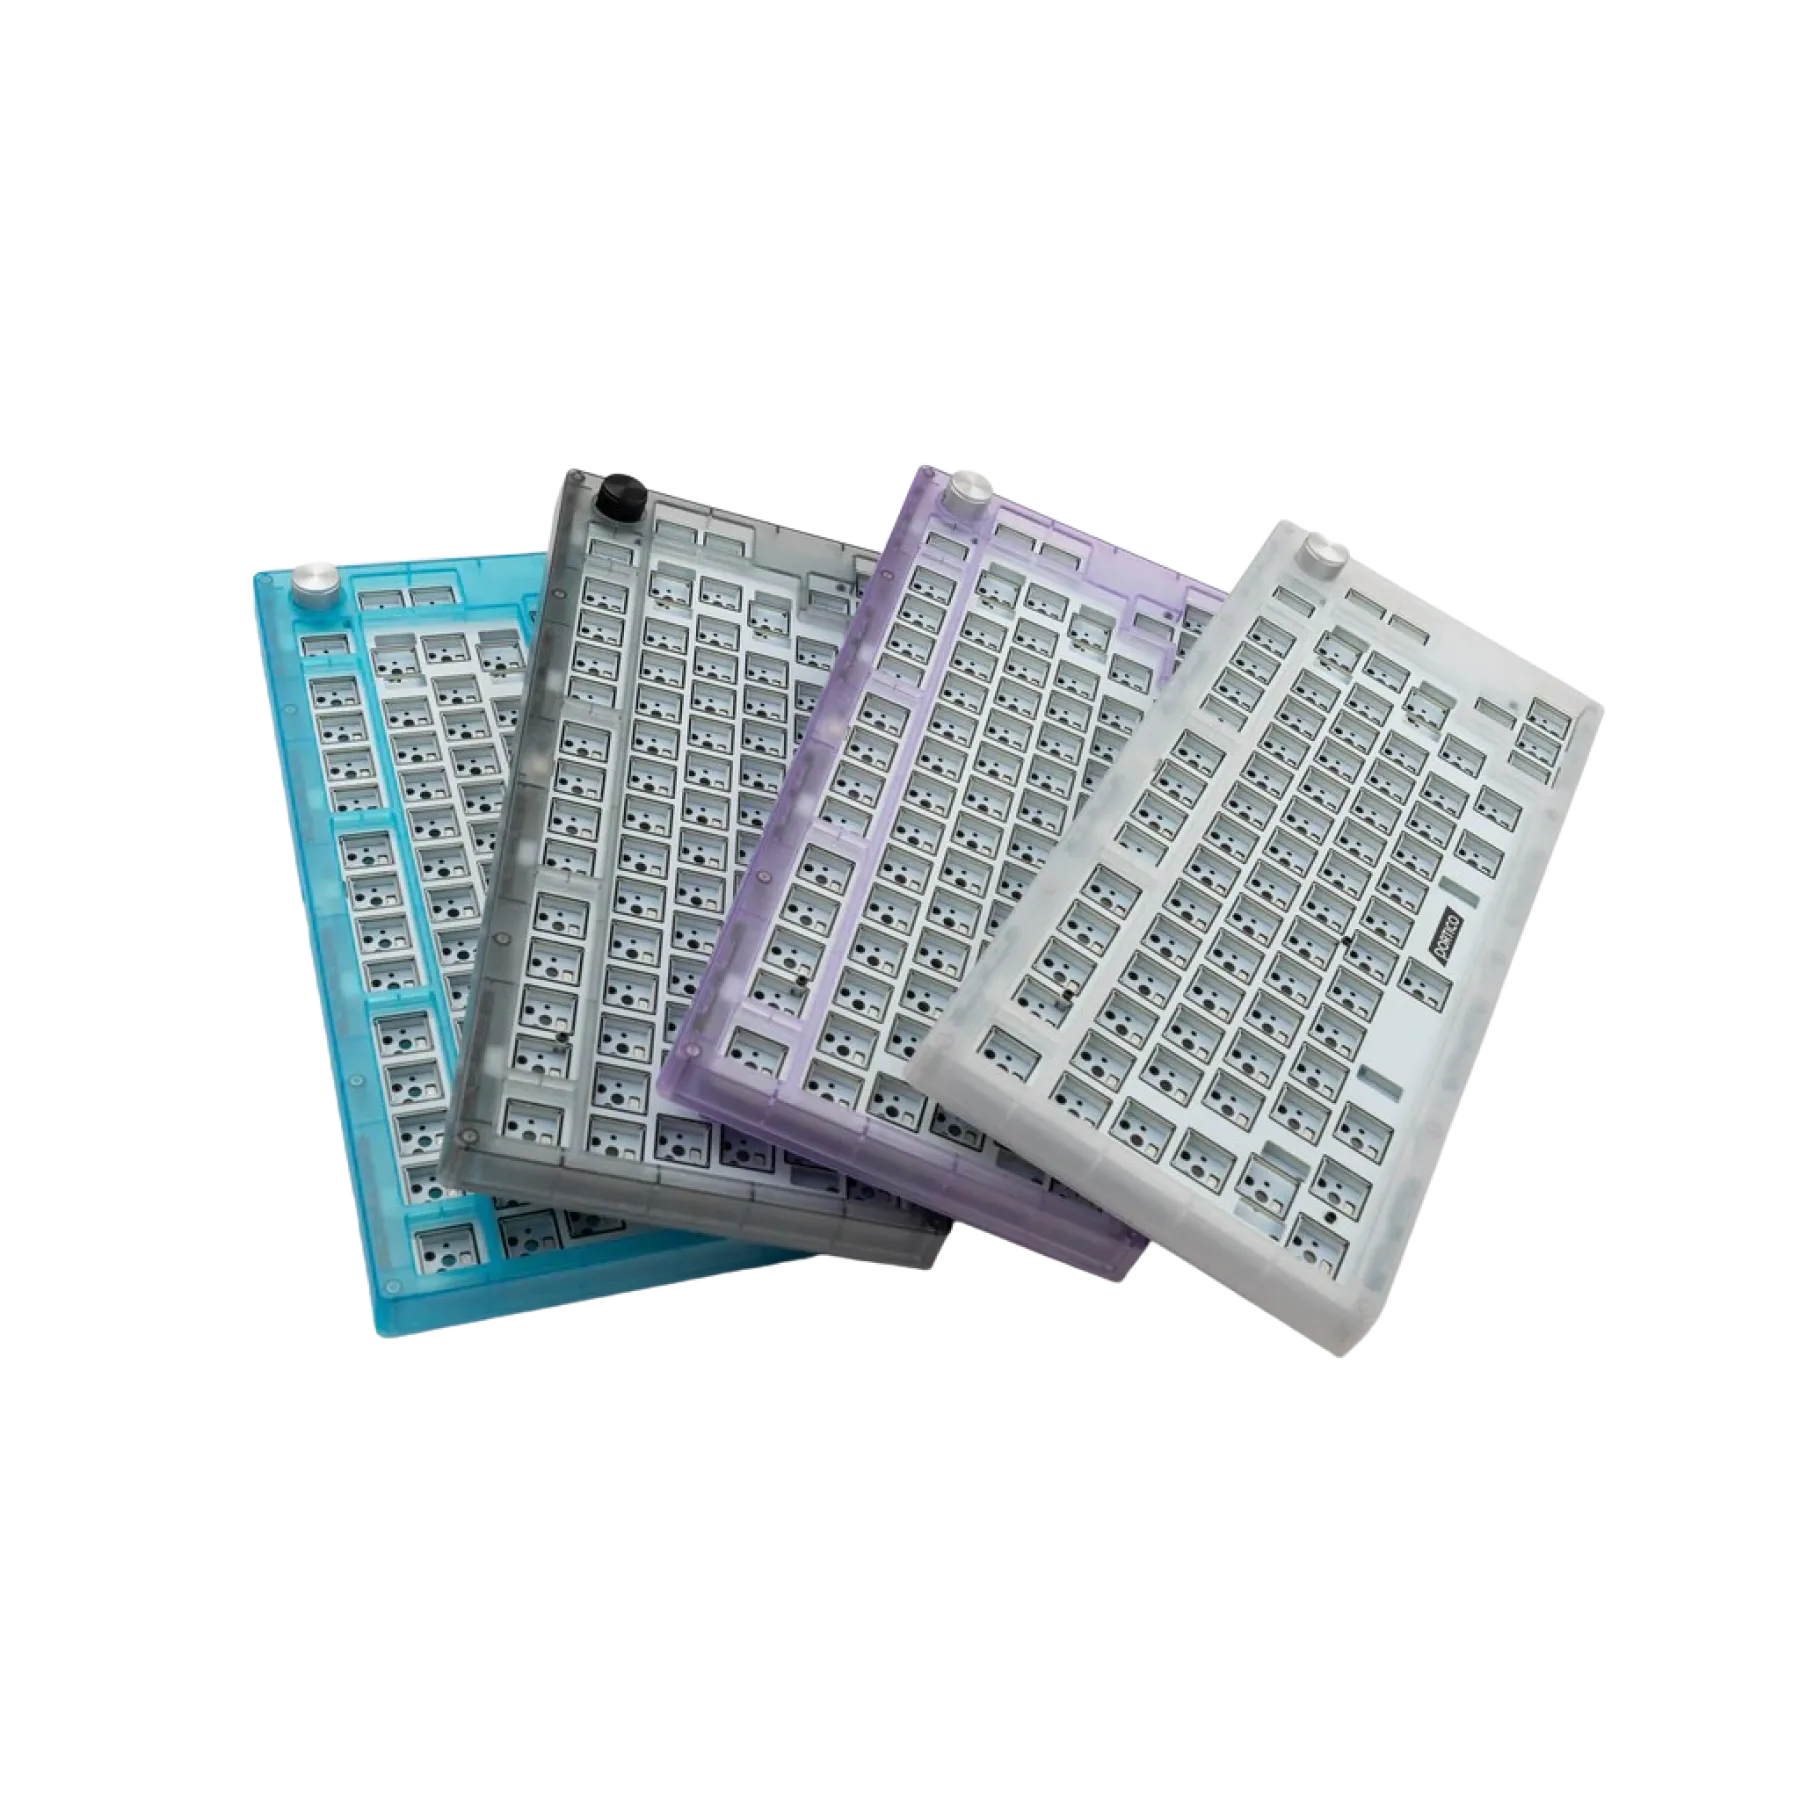 Image for PORTICO75 Keyboard Kit